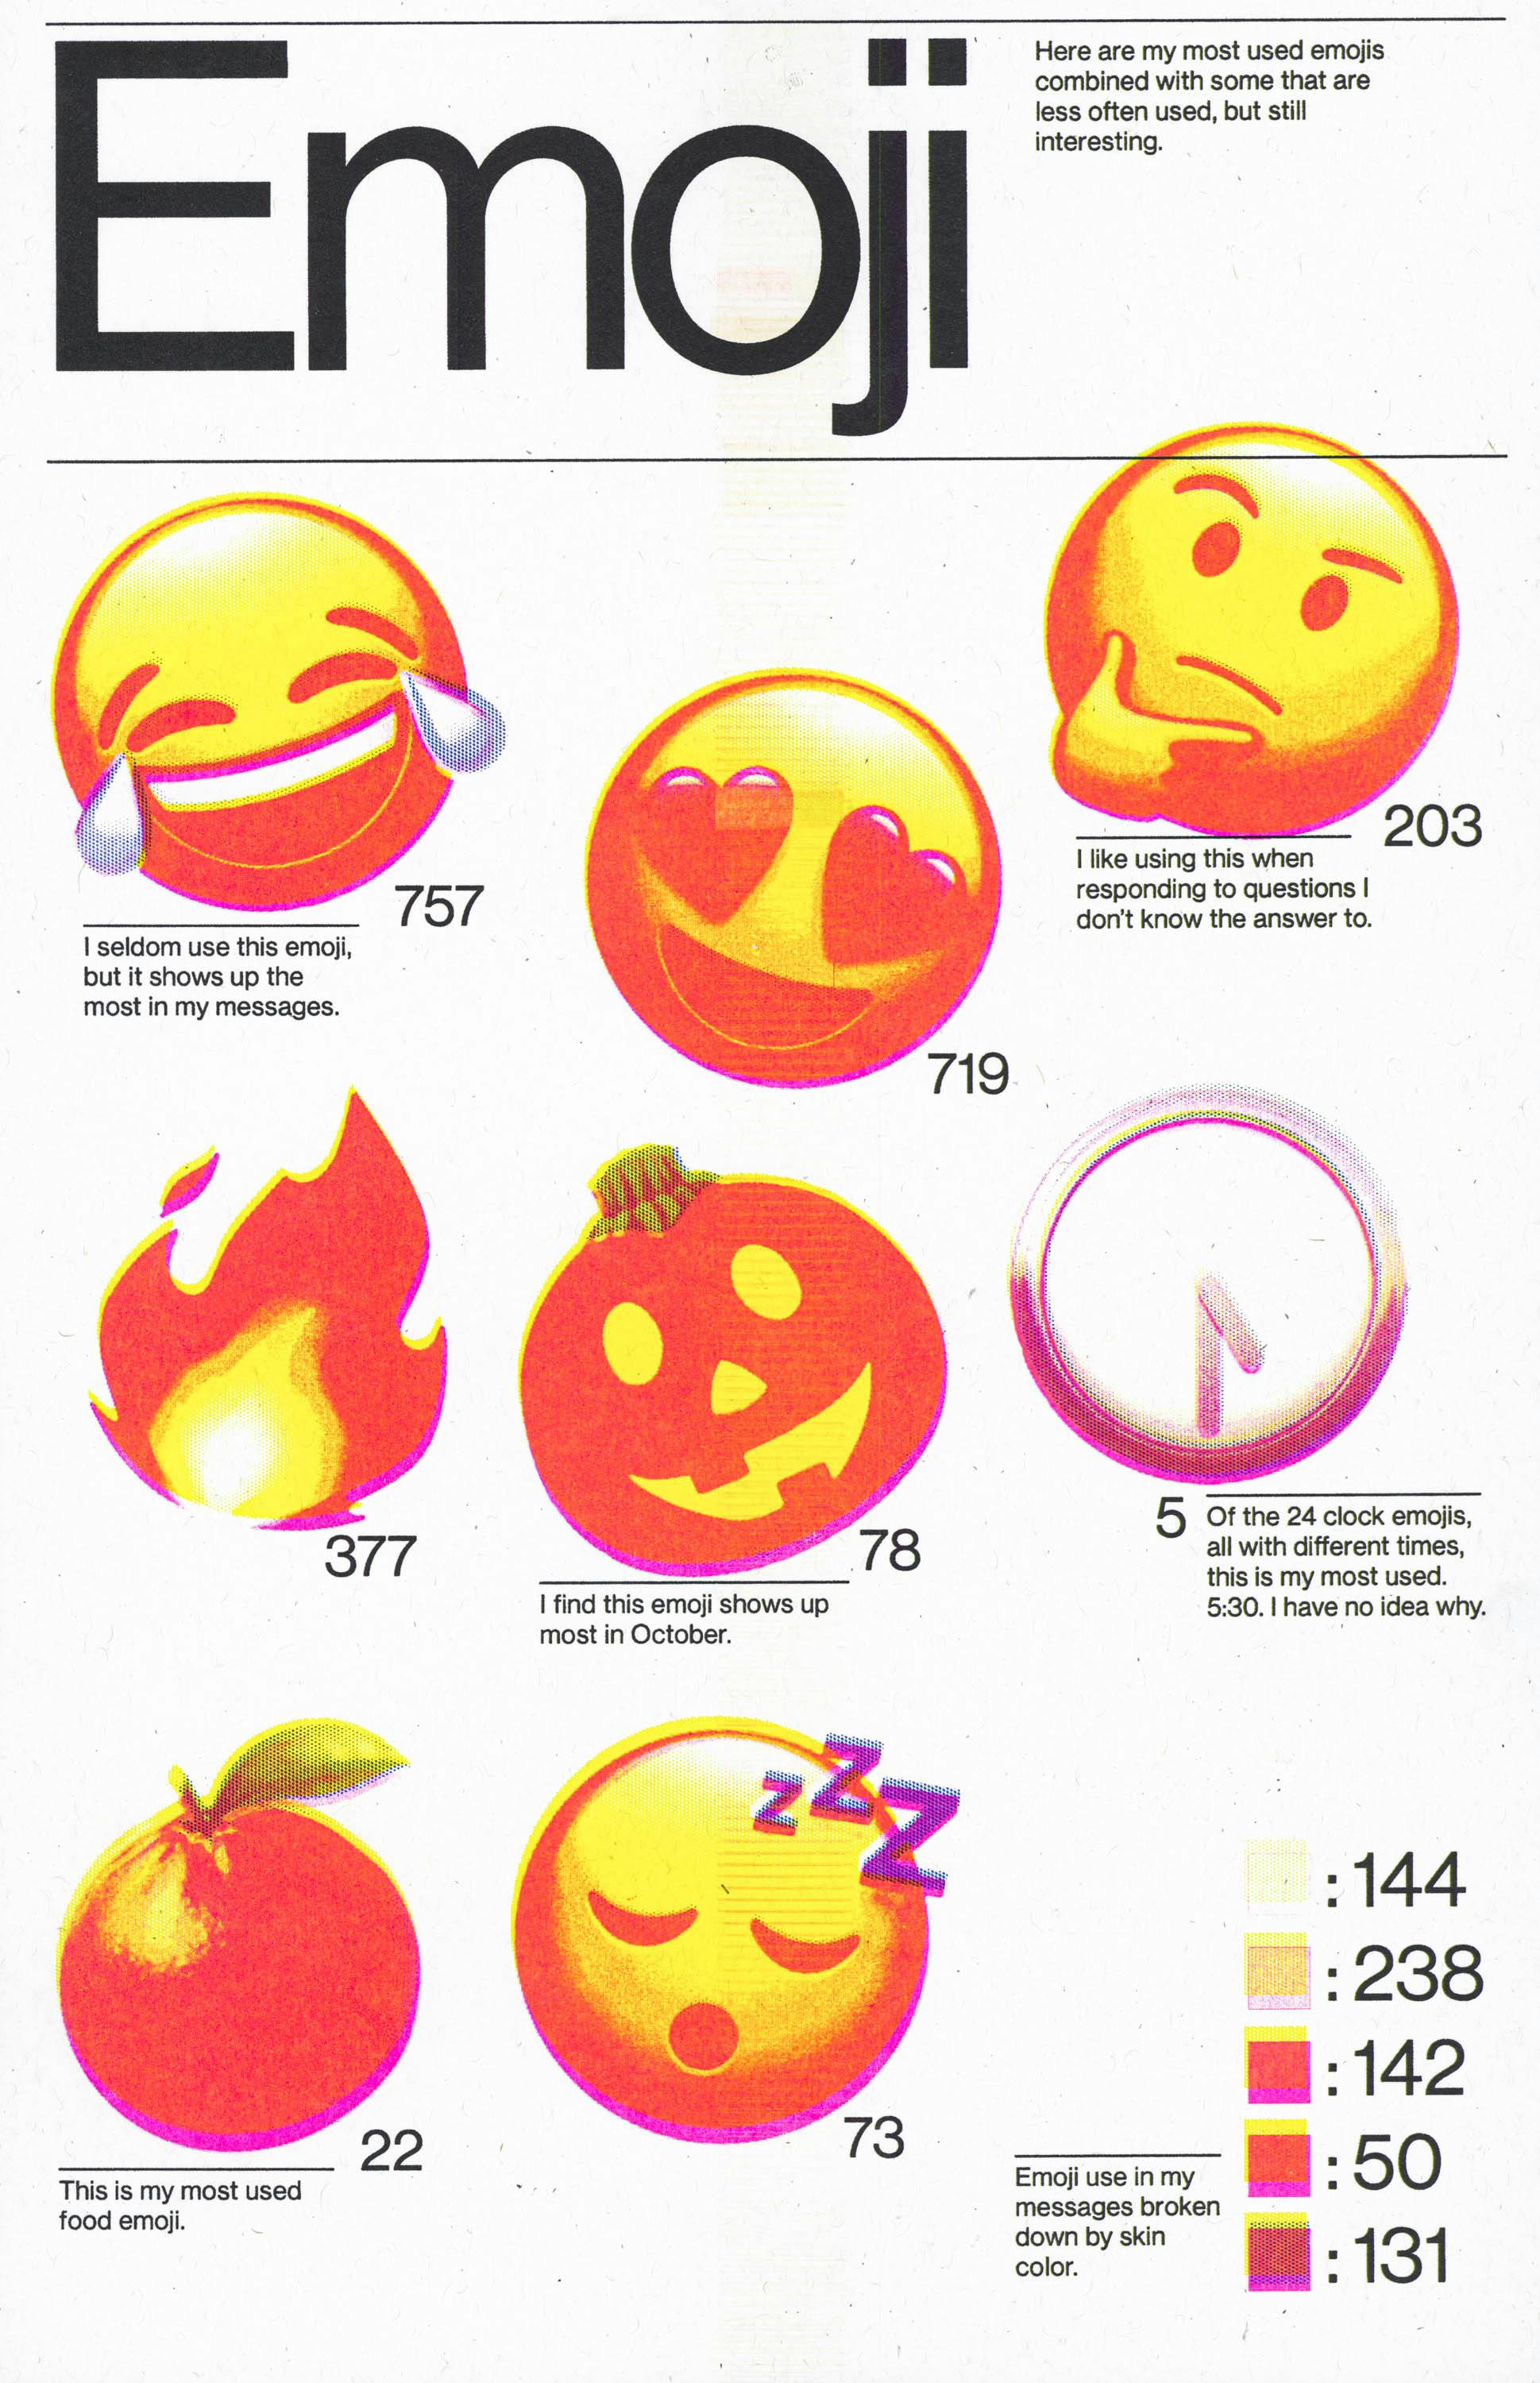 Infographic showcasing popular "Emoji" usage. Displays several emojis like laughing, heart eyes, and pumpkin with usage counts. Also has a small list showing counts for certain emojis.